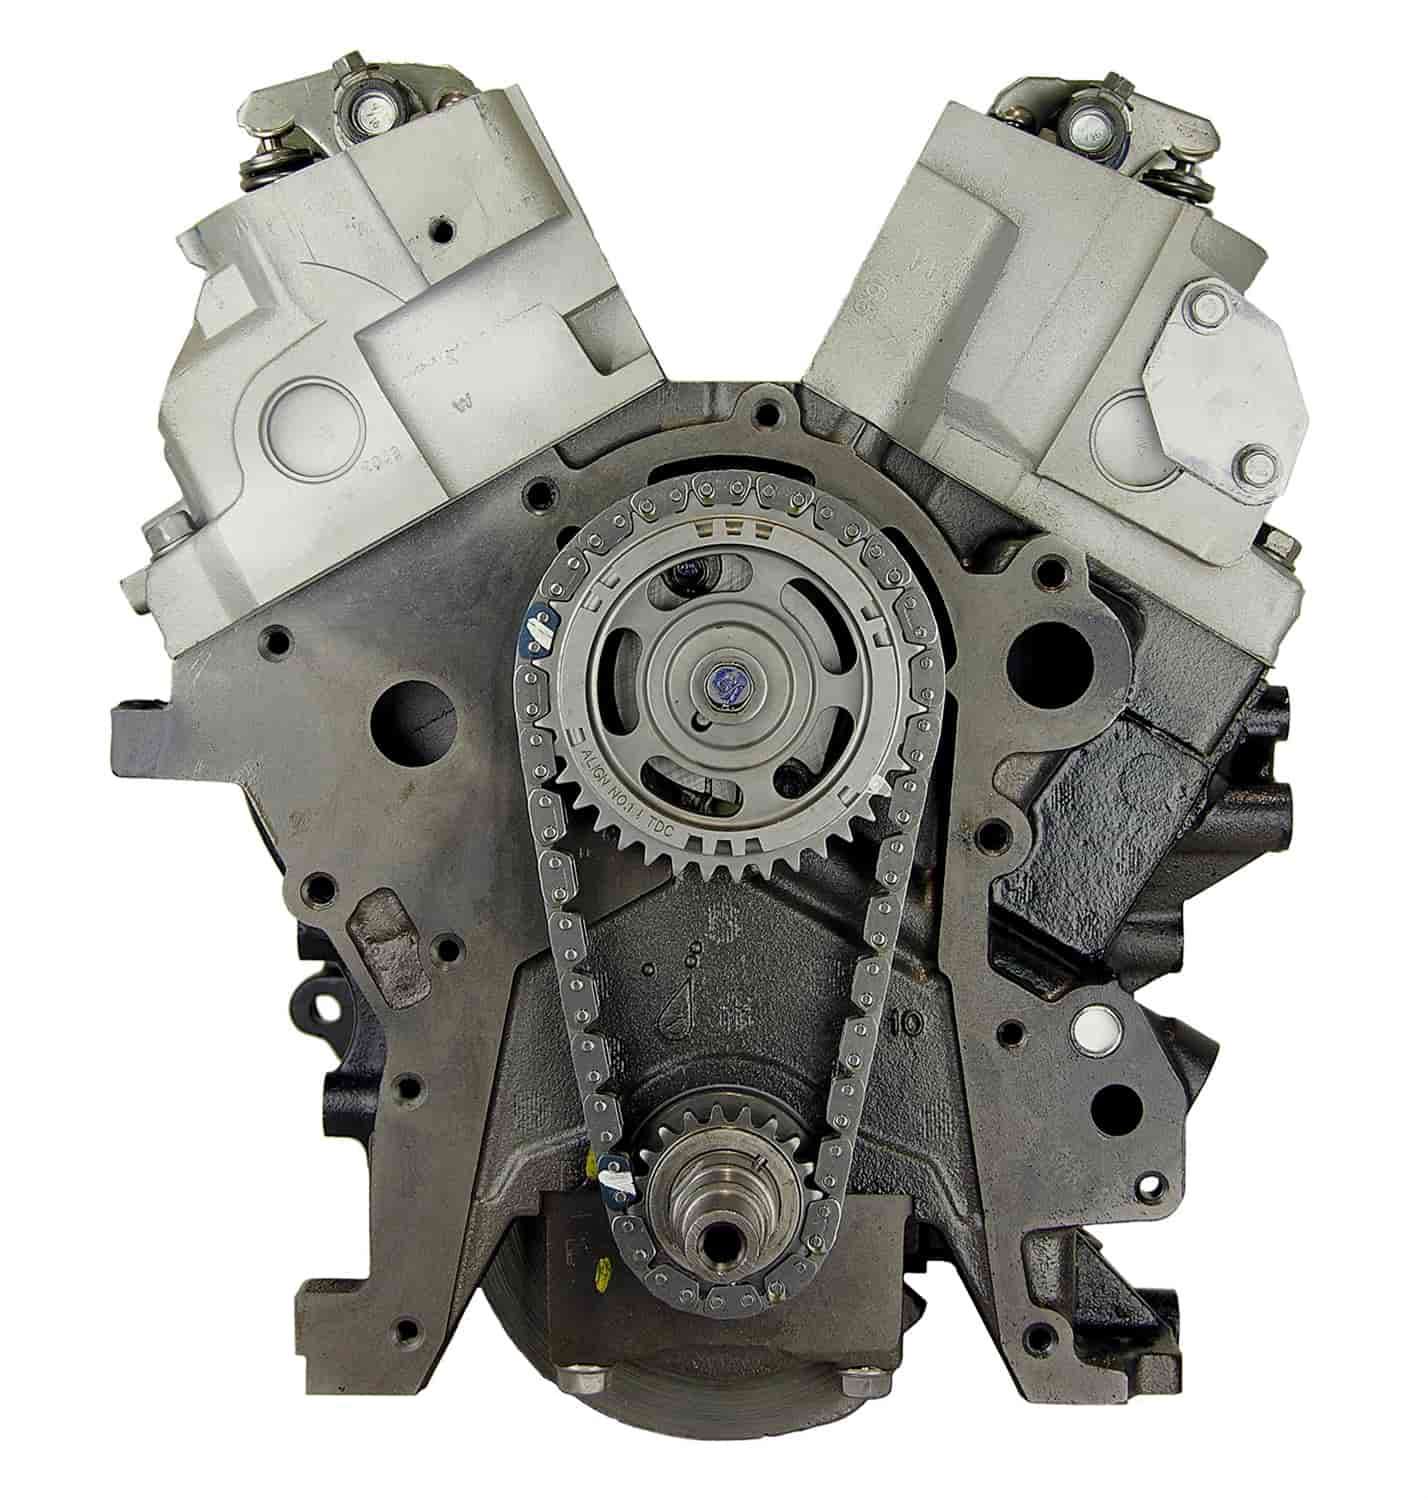 Remanufactured Crate Engine for 2005 Chrysler Pacifica with